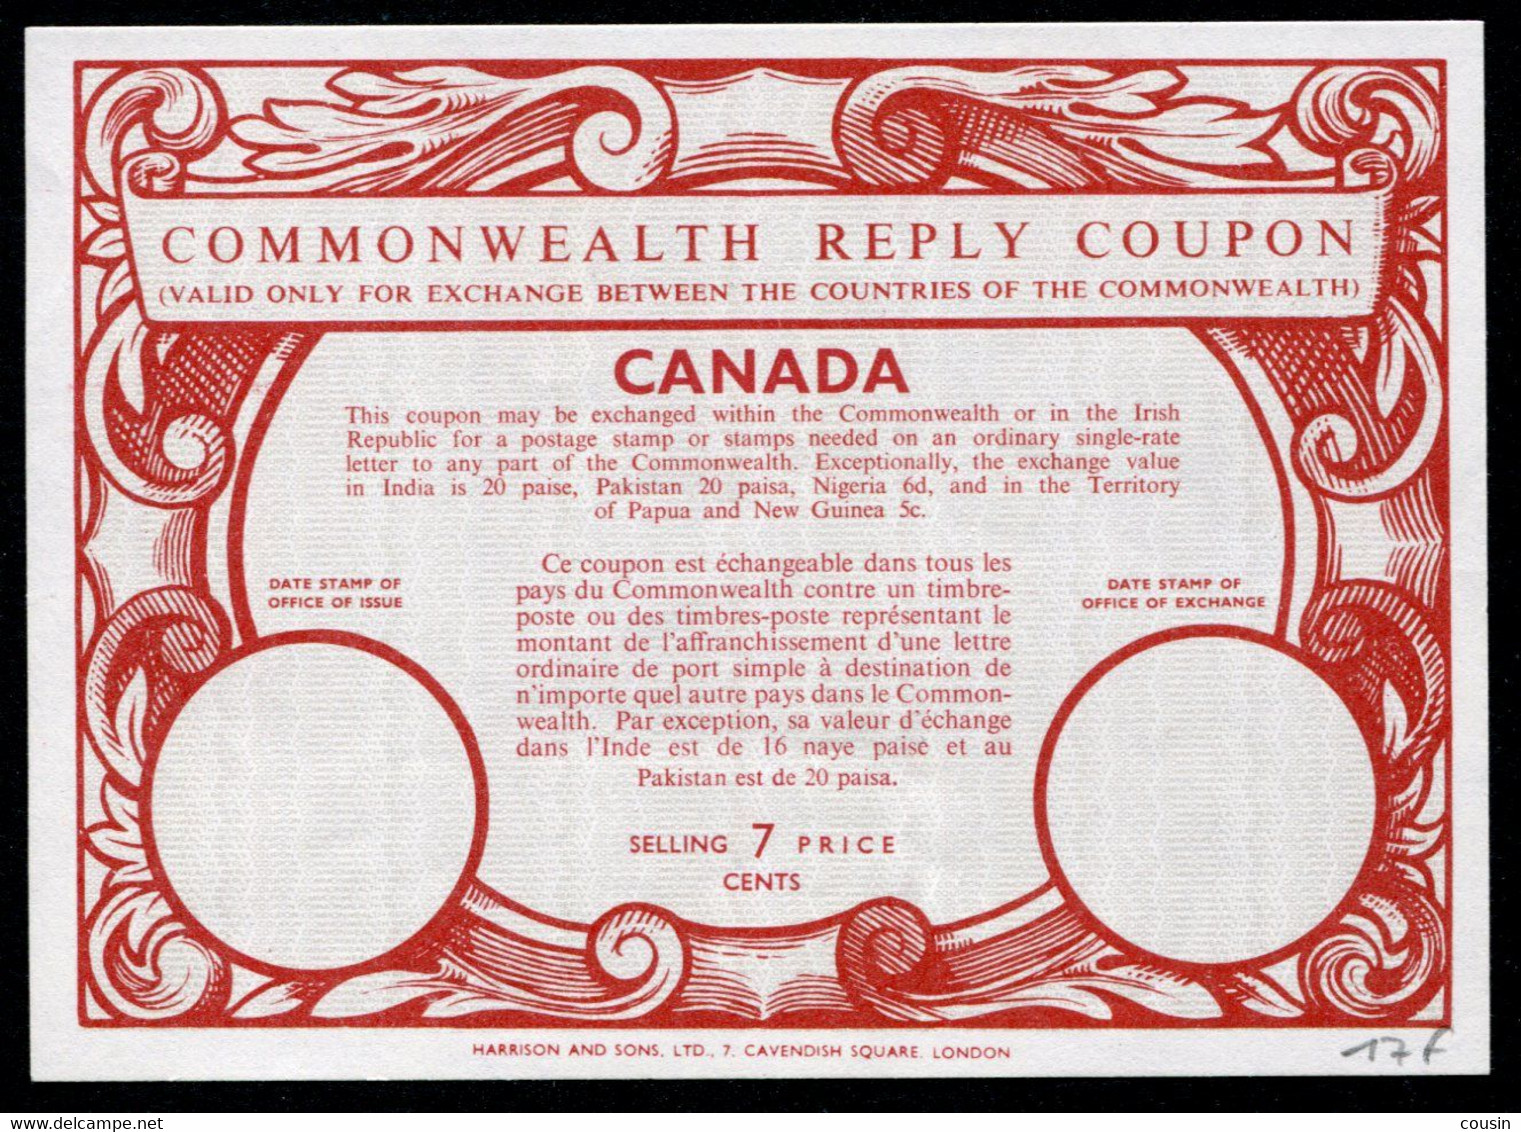 CANADA  7 CENTS  Commonwealth Reply Coupon / Coupon-réponse Régime Britannique - Reply Coupons